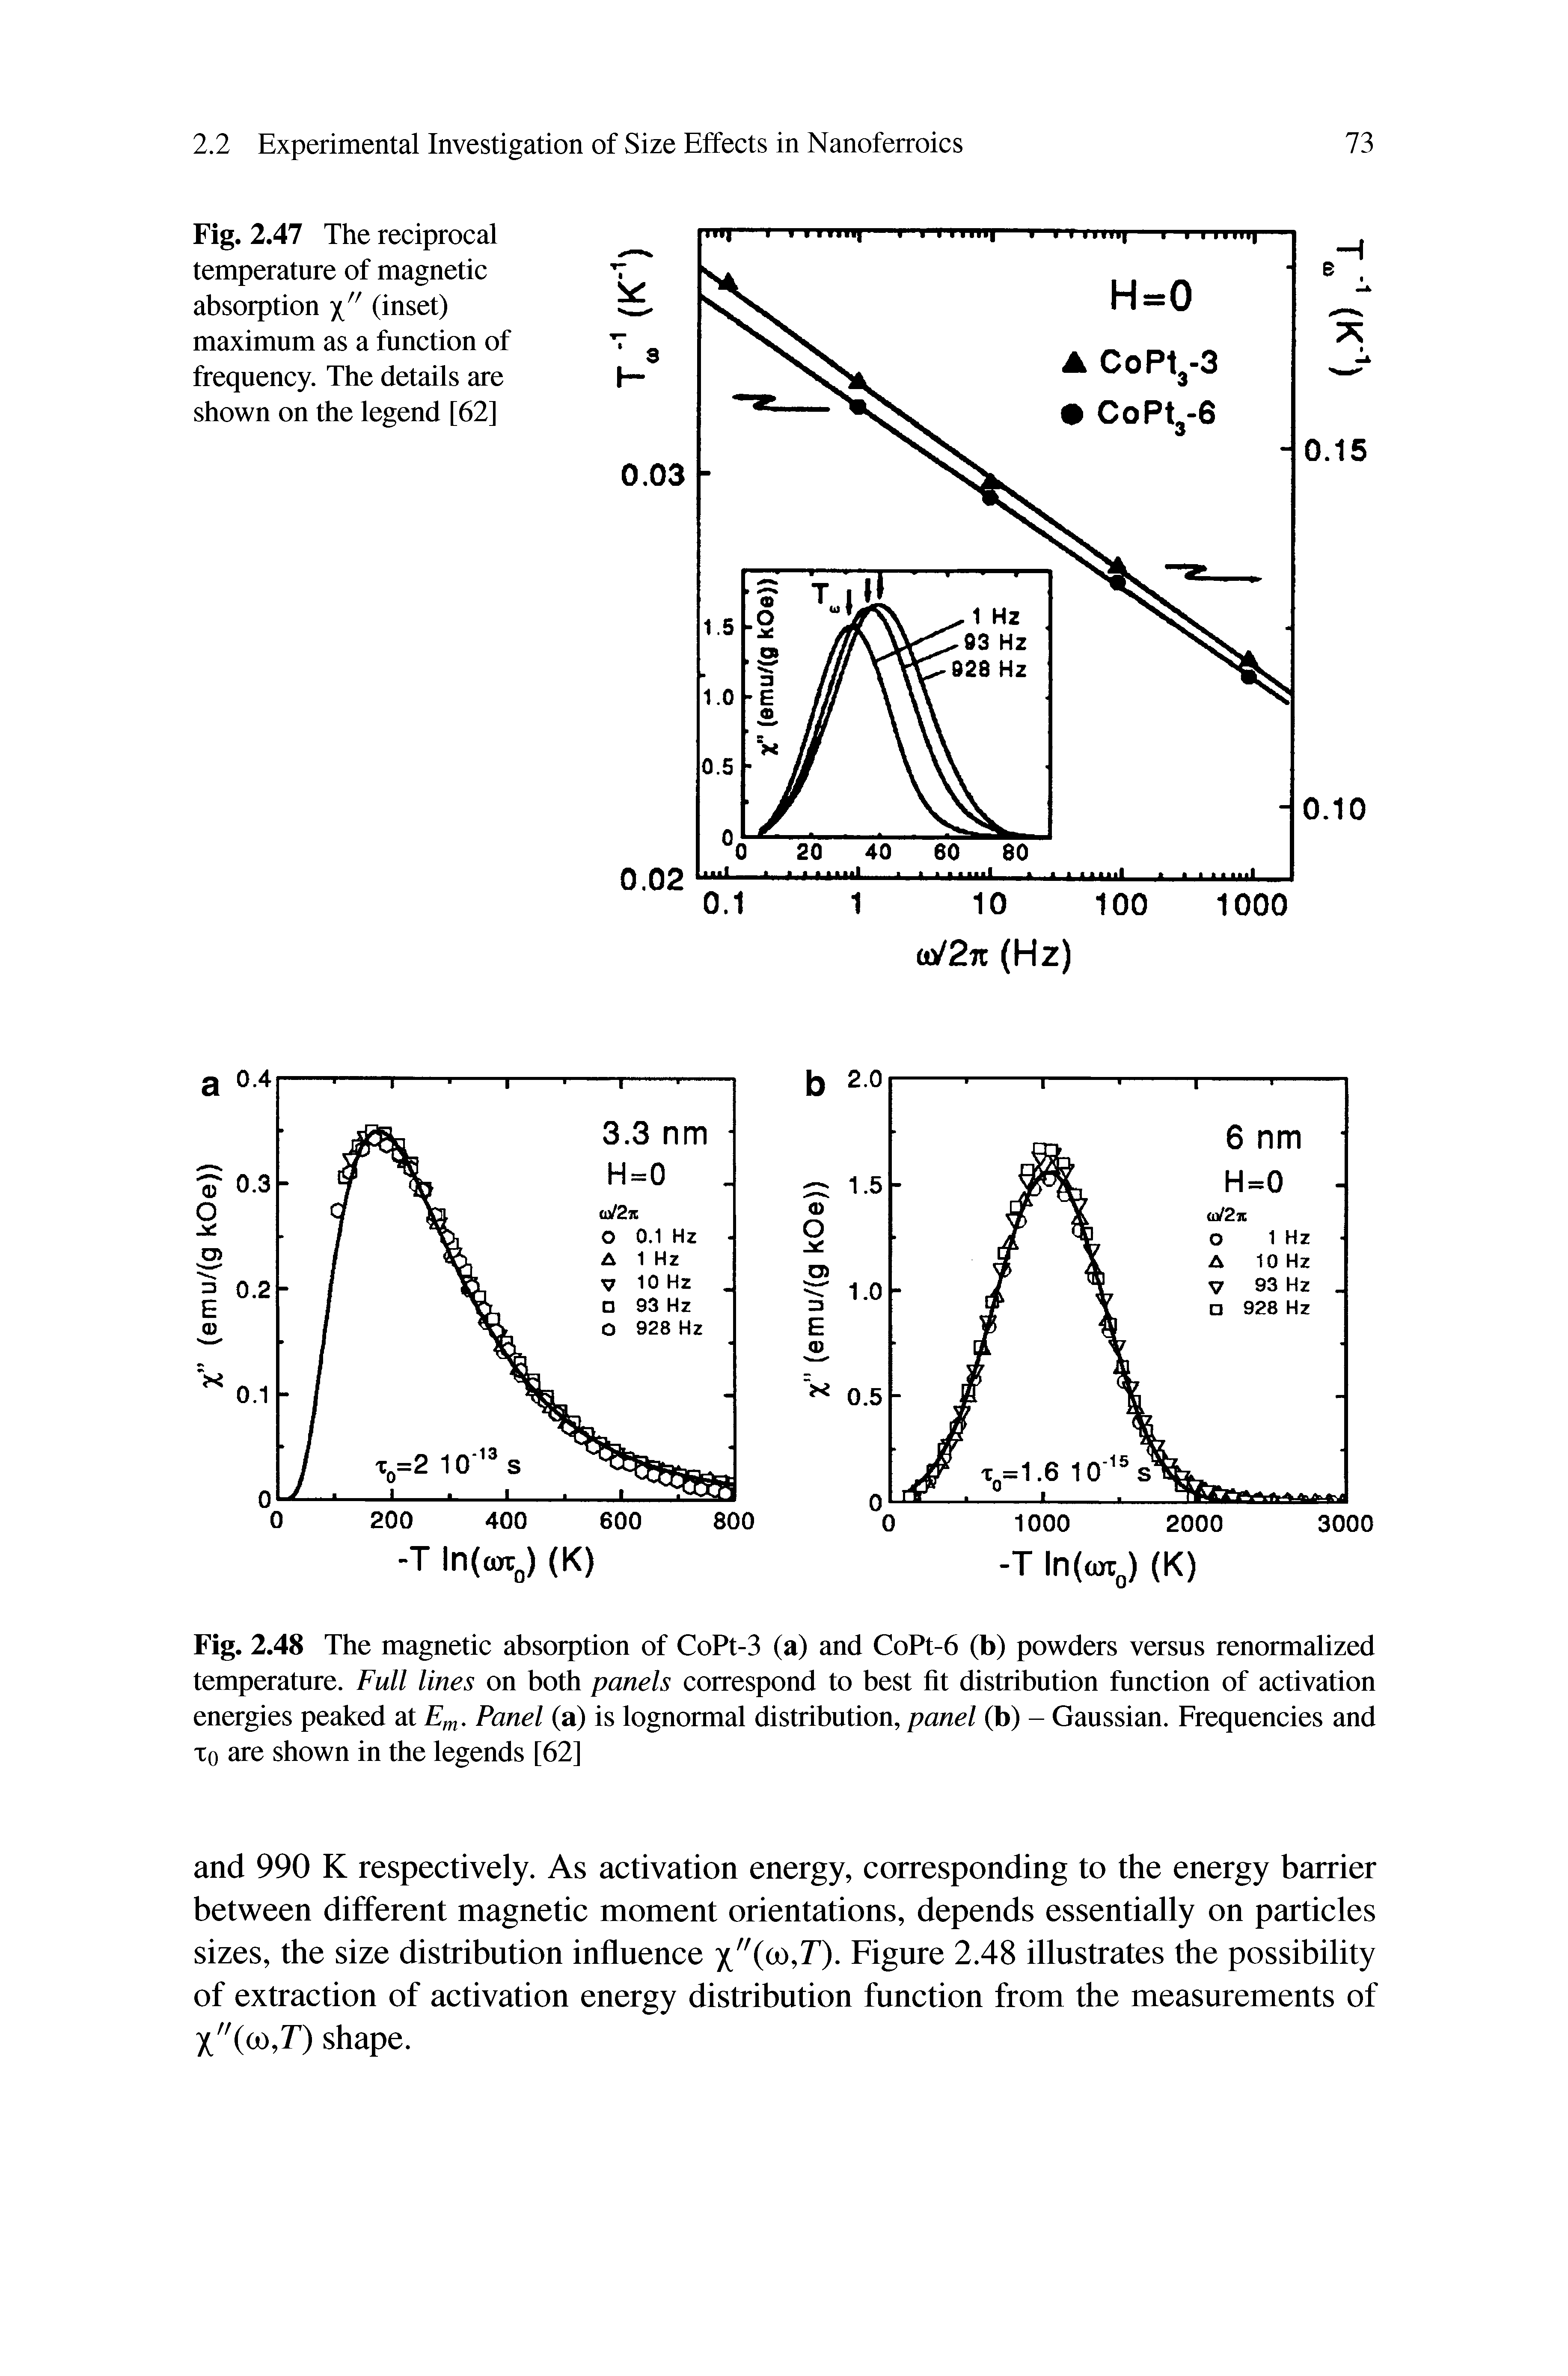 Fig. 2.47 The reciprocal temperature of magnetic absorption (inset) maximum as a function of frequency. The details are shown on the legend [62]...